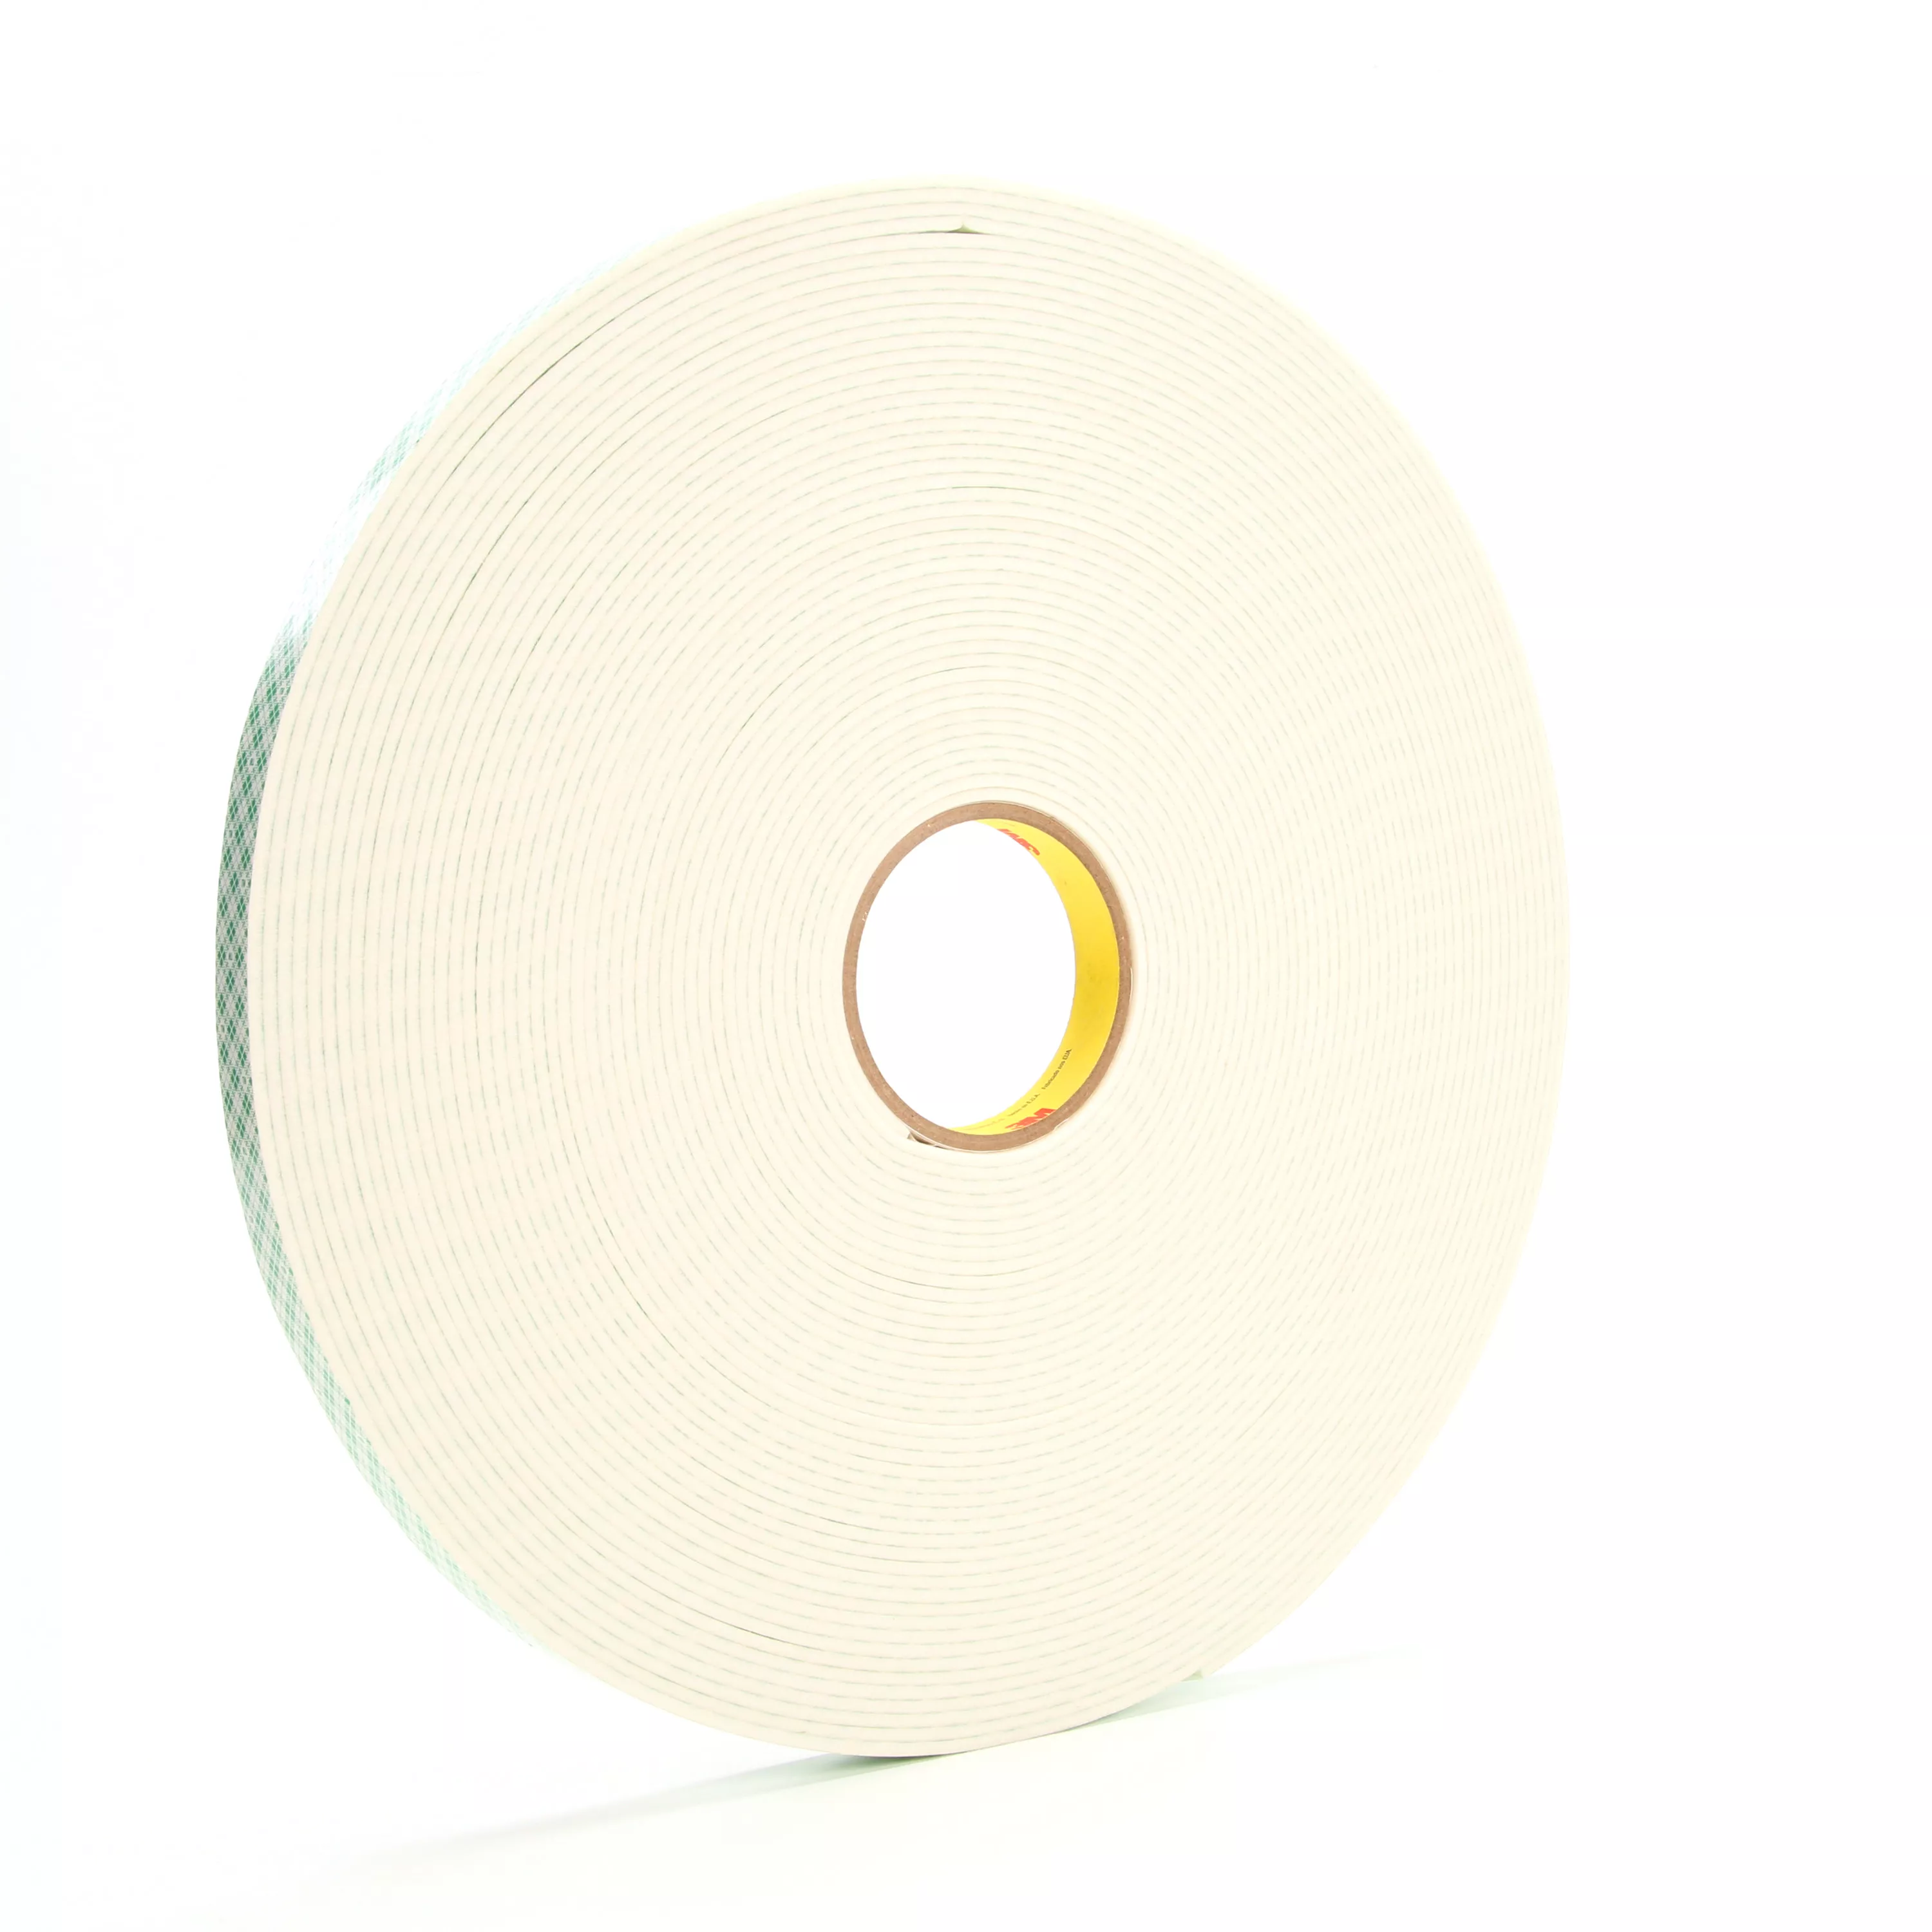 3M™ Double Coated Urethane Foam Tape 4008, Off White, 3/4 in x 36 yd,
125 mil, 12 Roll/Case